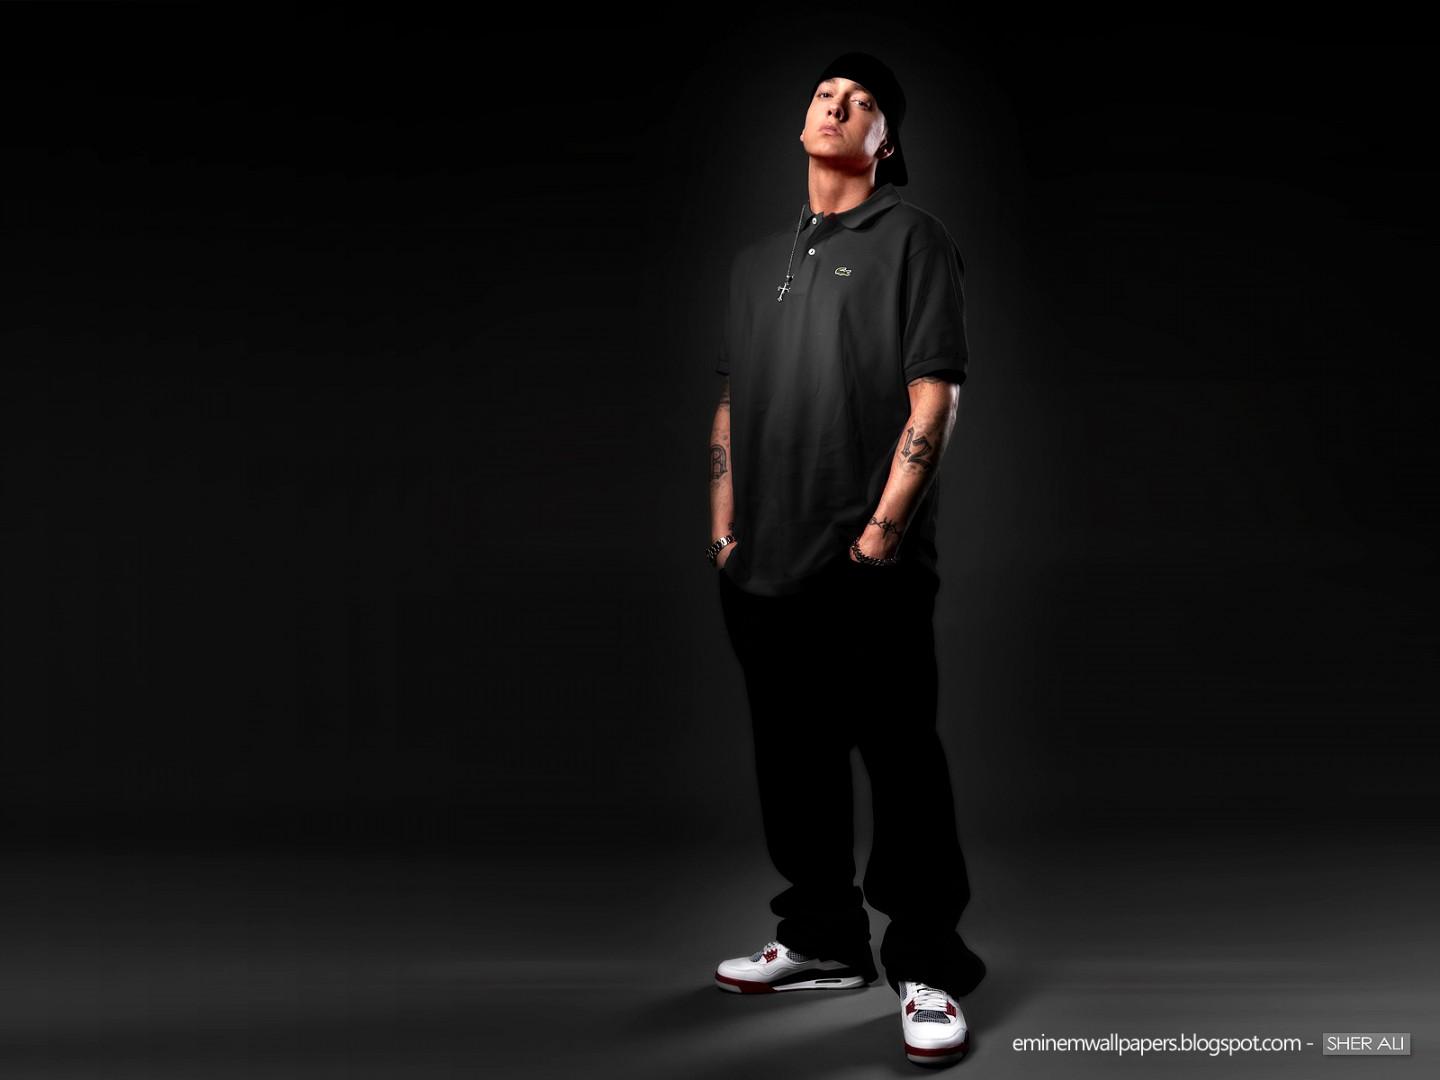 Download Eminem HD Wallpaper 2014 HD Background Picture to pin